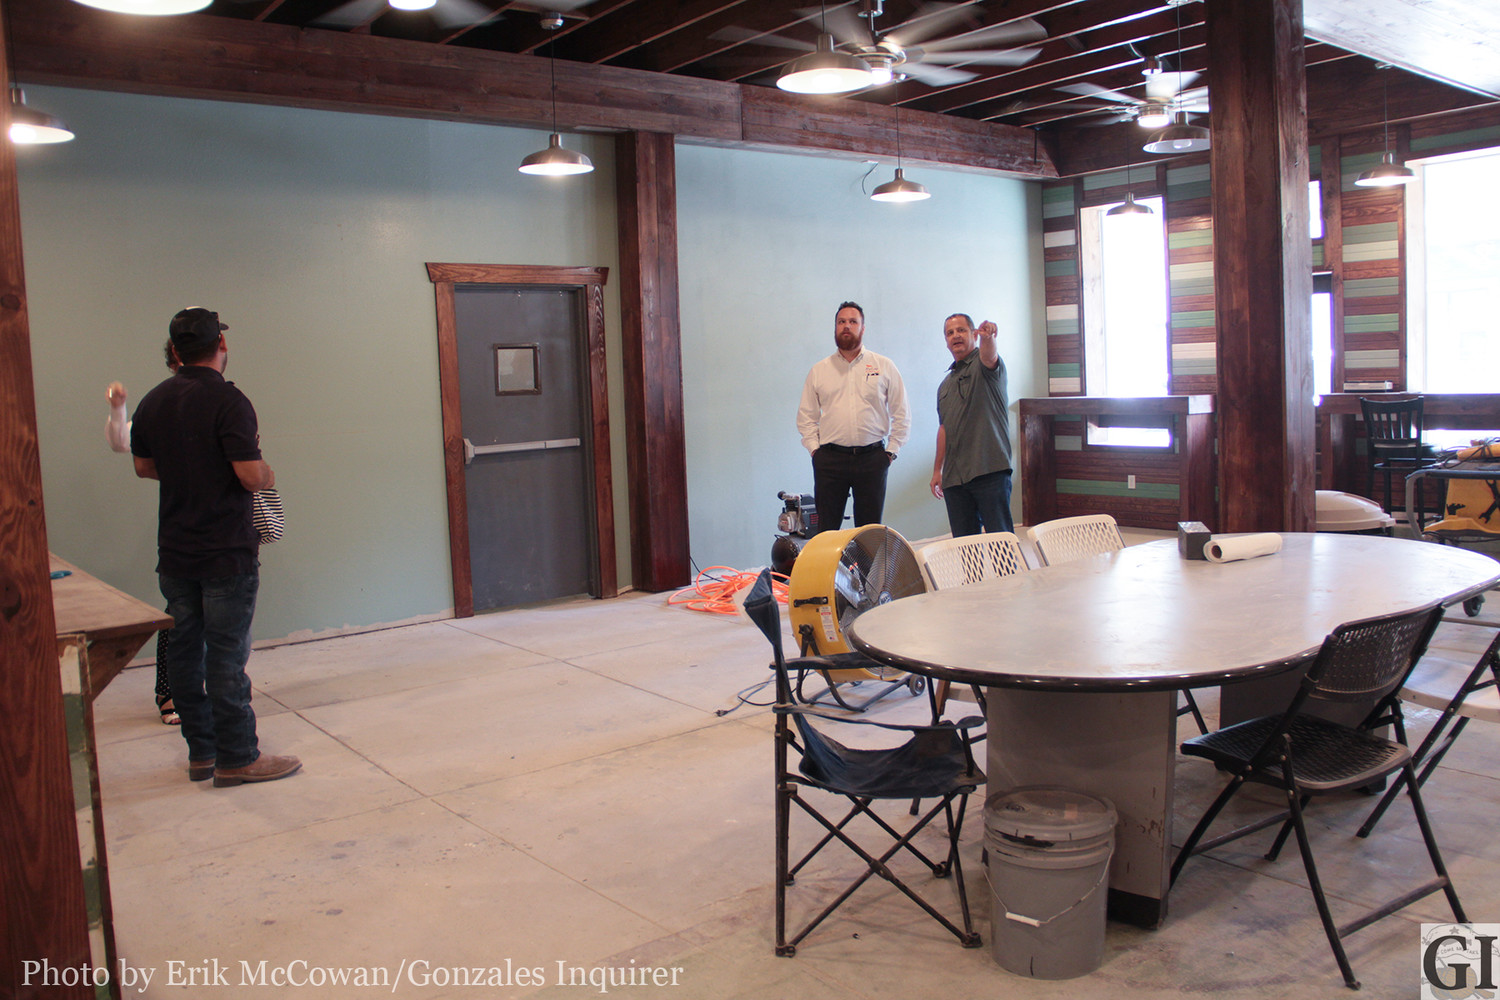 Members of GEDC take a tour of the soon-to-be-opened St. George Deli & Coffee Shop. There are also 7 offices within the complex that will host various small businesses.